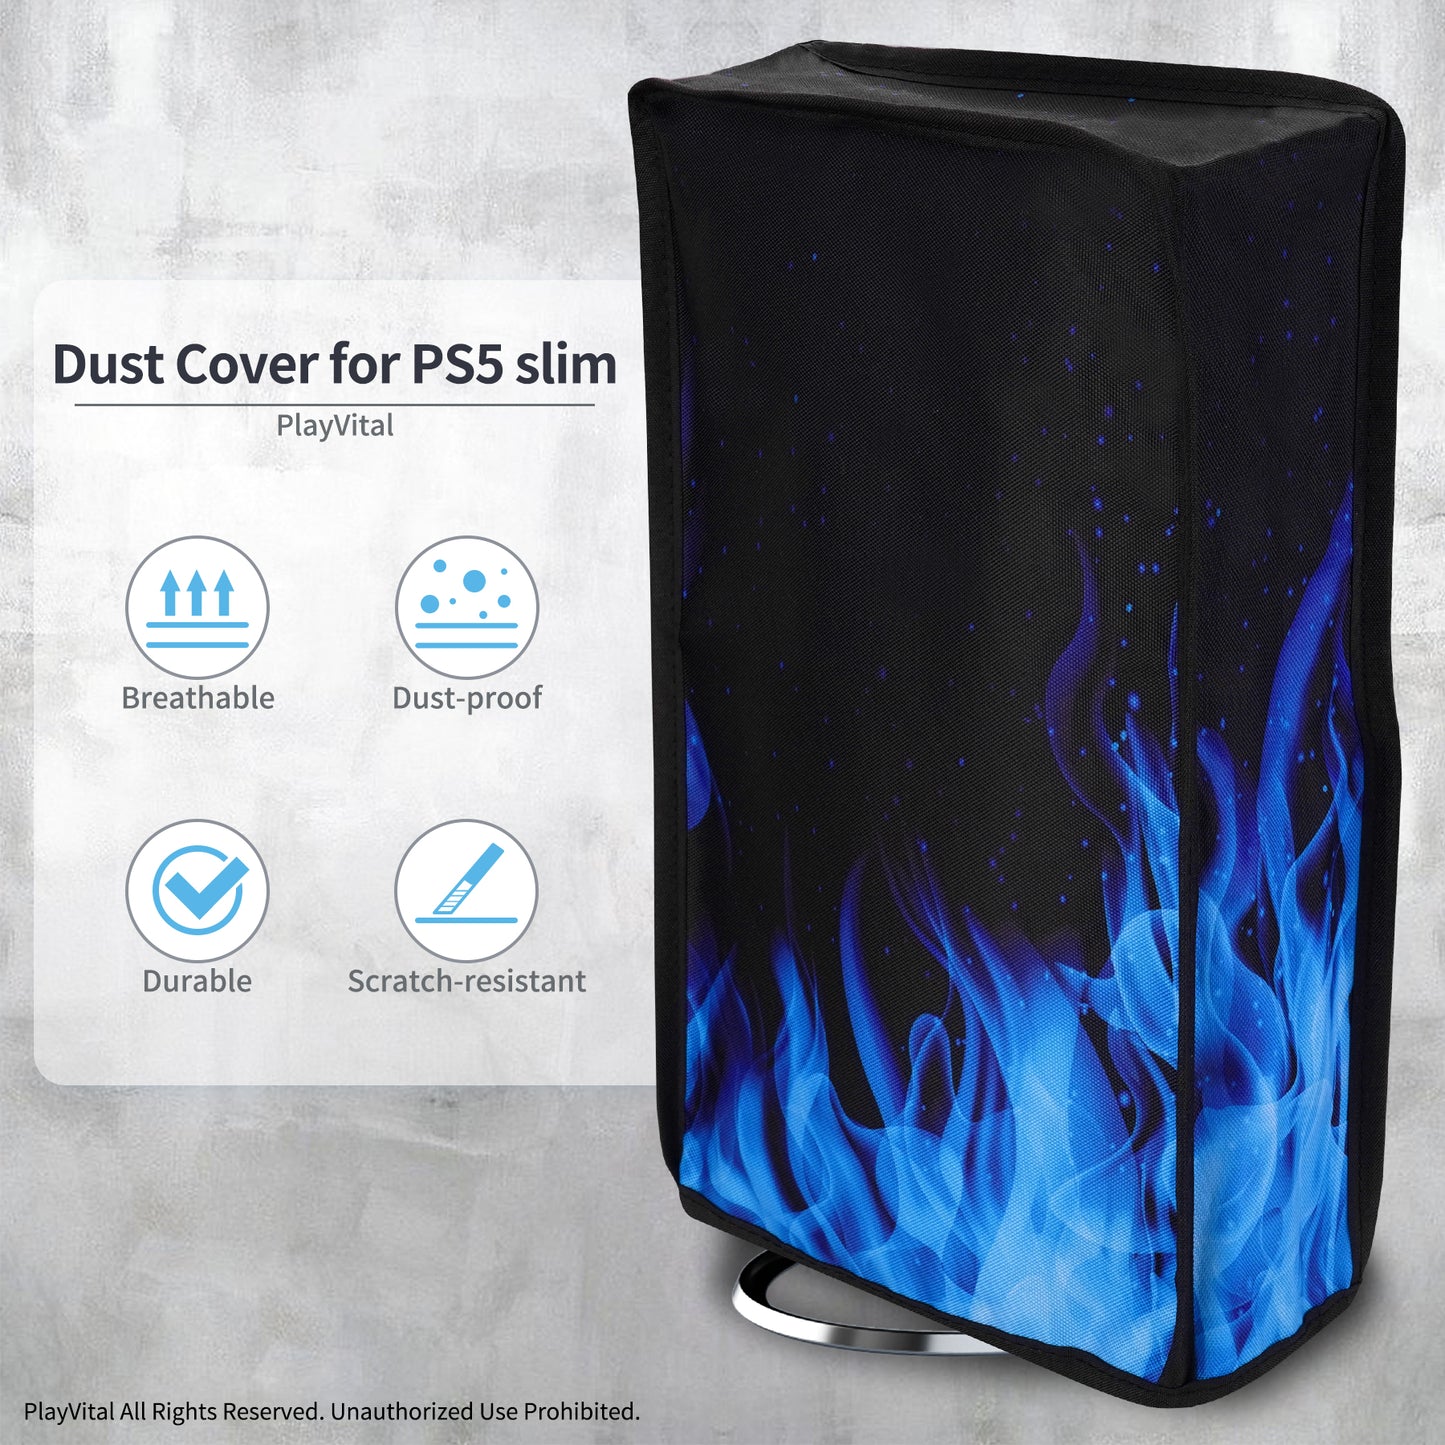 PlayVital Vertical Dust Cover for ps5 Slim Disc Edition(The New Smaller Design), Nylon Dust Proof Protector Waterproof Cover Sleeve for ps5 Slim Console - Blue Flame - BMYPFH006 PlayVital